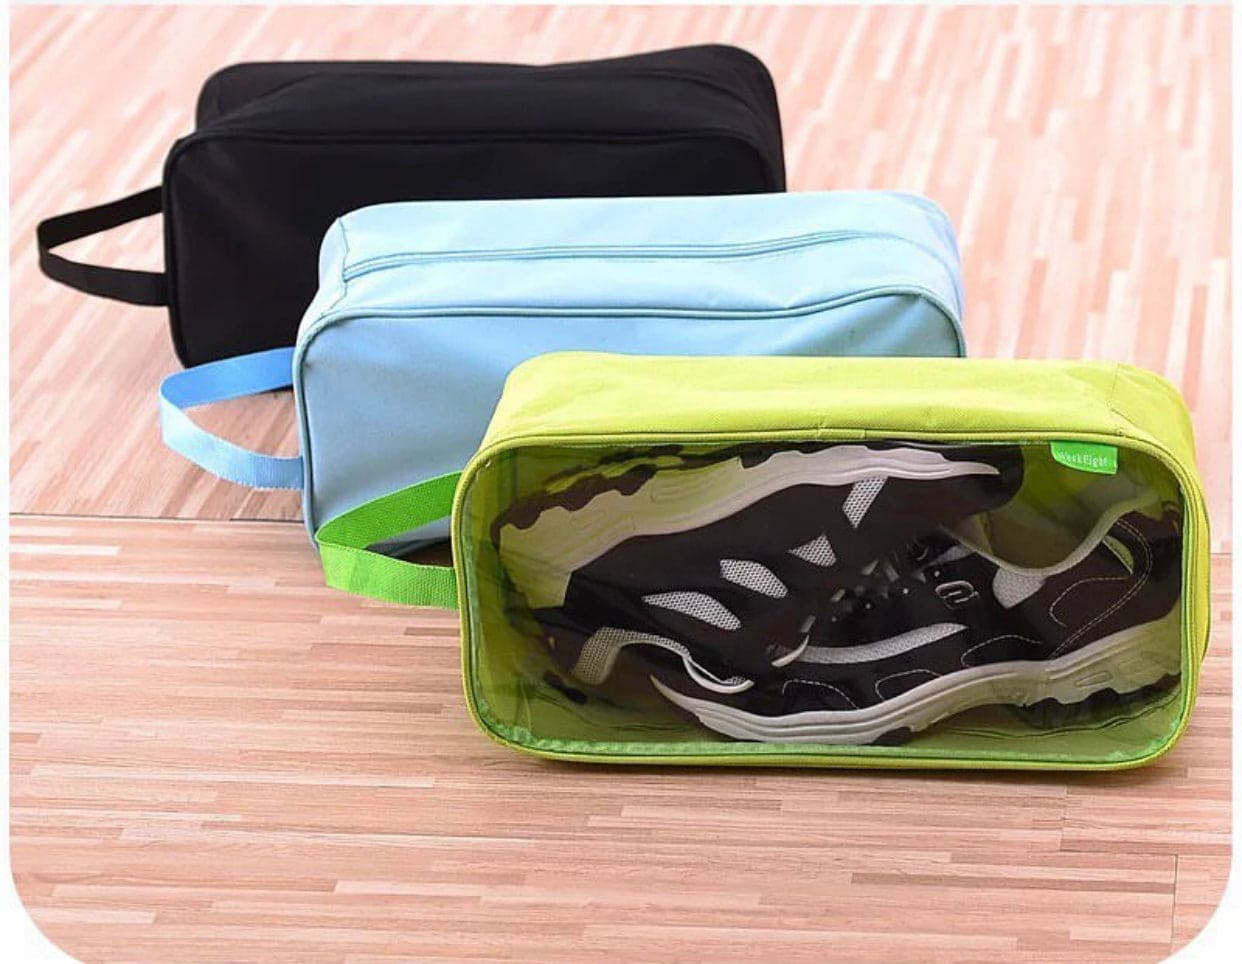 Large Capacity Colorful Travel Transparent Shoe Bag, Suit case Luggage Organizers, Durable Travel Essential Toiletry Waterproof Shoe Organizers, Travel Portable Sorting Pouch